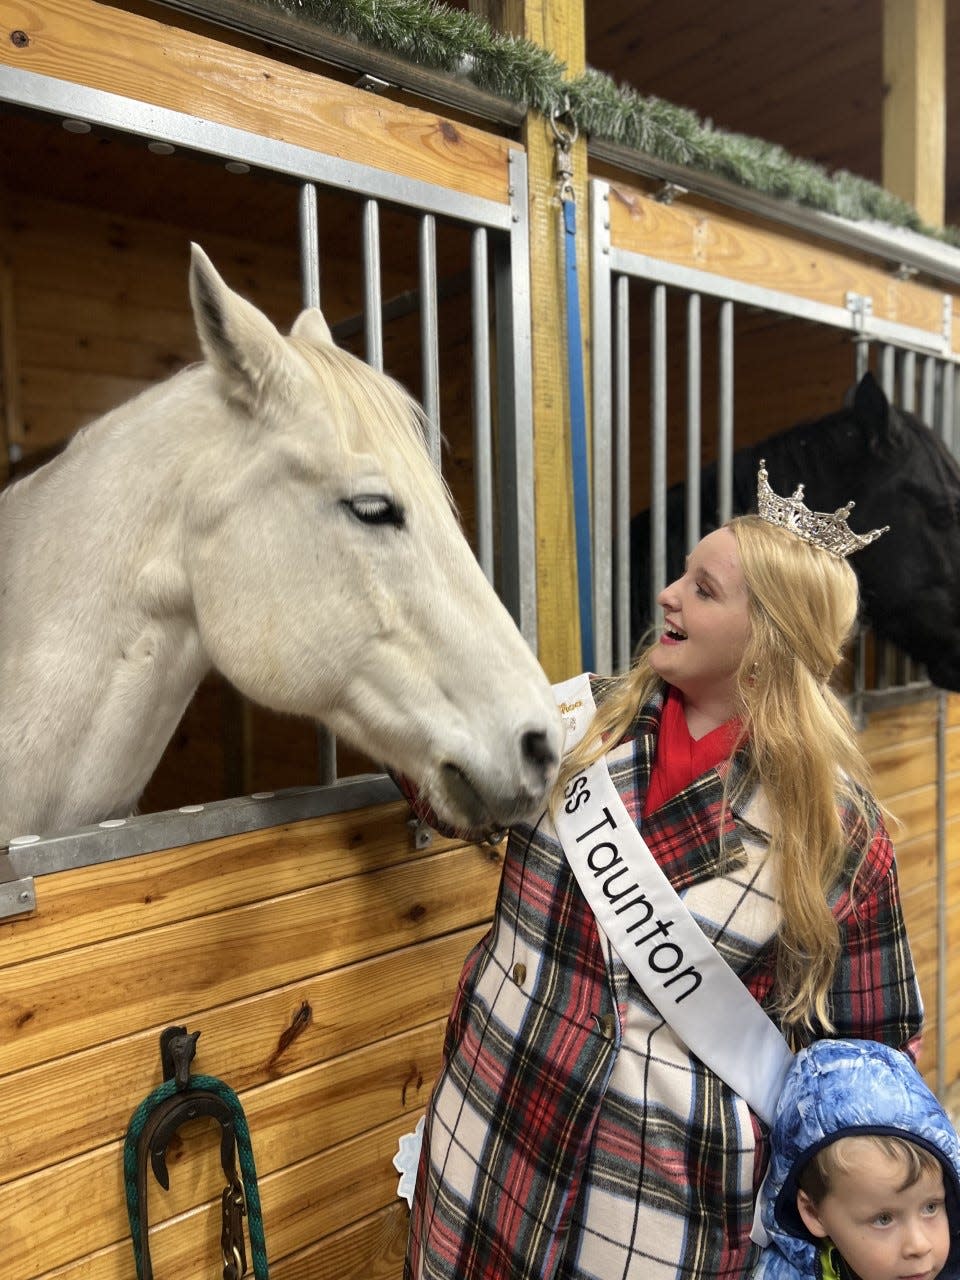 Miss Taunton 2023 Lily Jeswald attended the holiday opening for Deep Pond Farm and Stables in East Taunton with her nephew Brady Pelland.